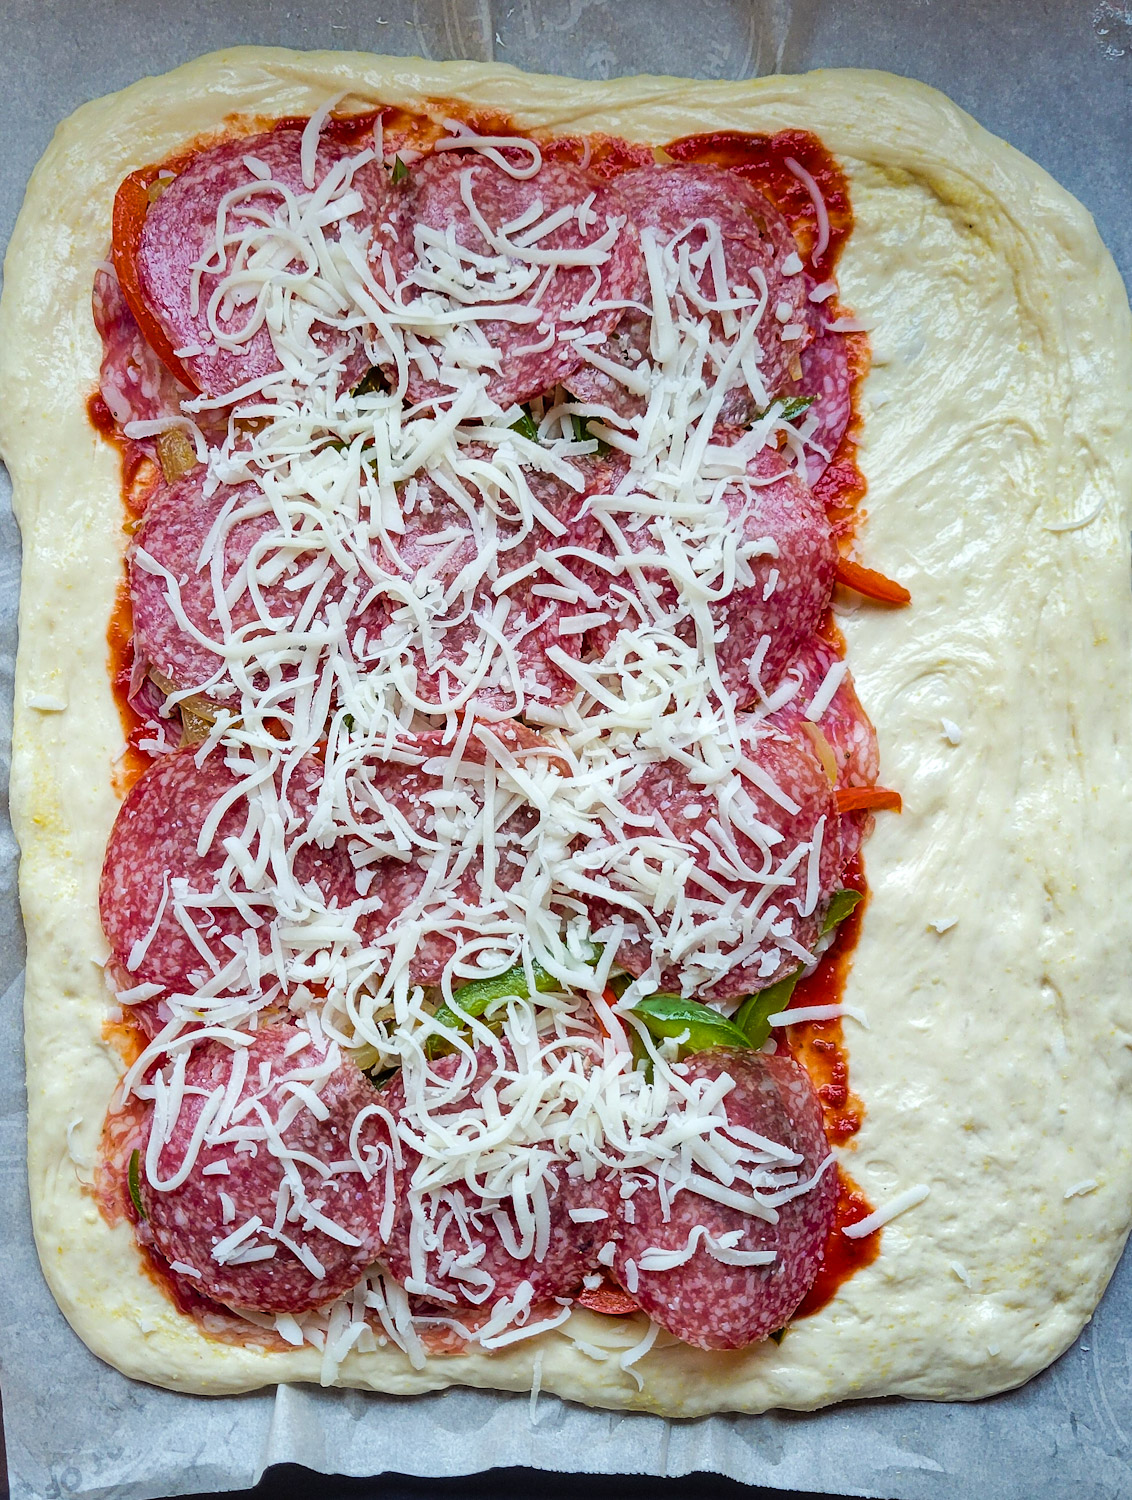 Showing all the layers of ingredients before rolling up a stromboli or rolled pizza.